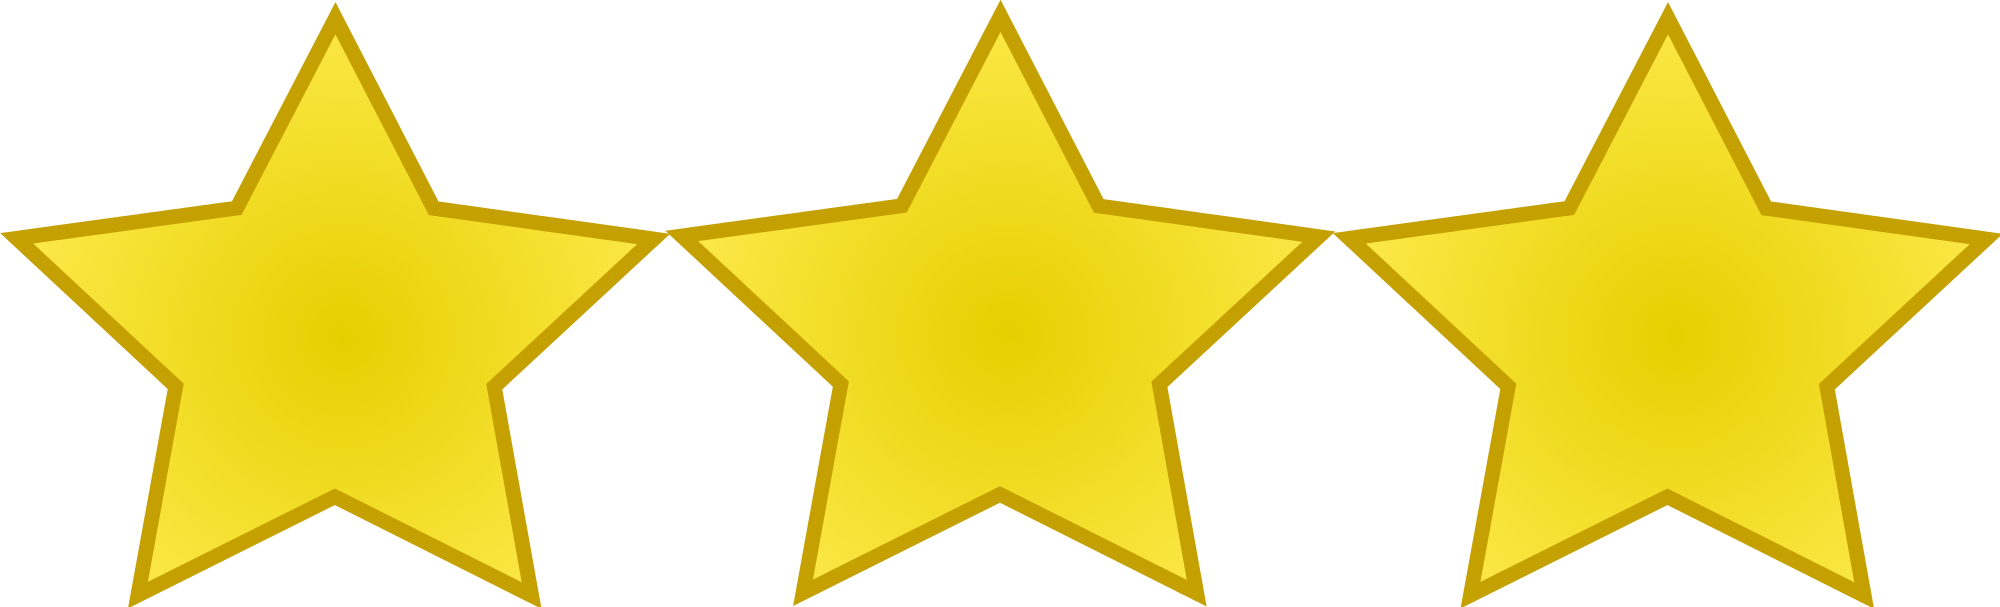 What does “3 stars” mean? | KidsLearn